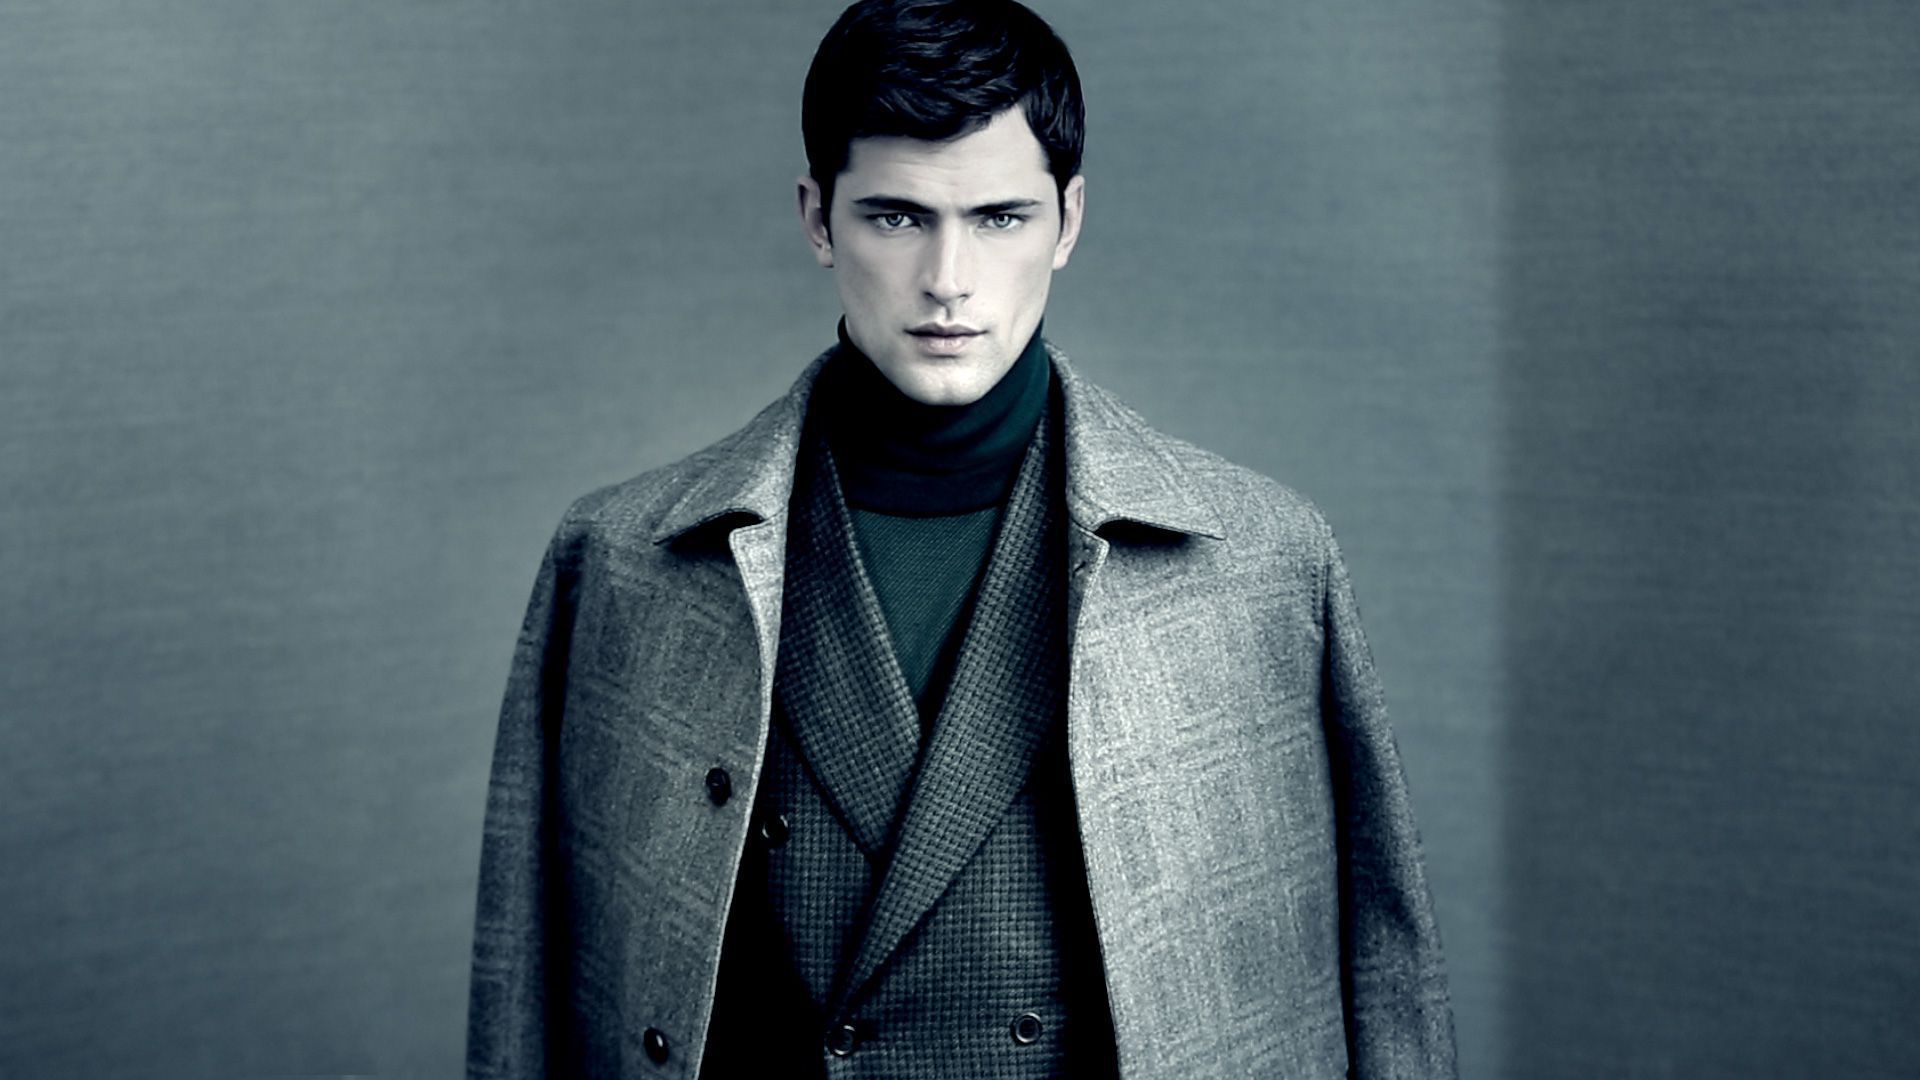 Sean O'Pry phone, desktop wallpapers, pictures, photos, bckground.